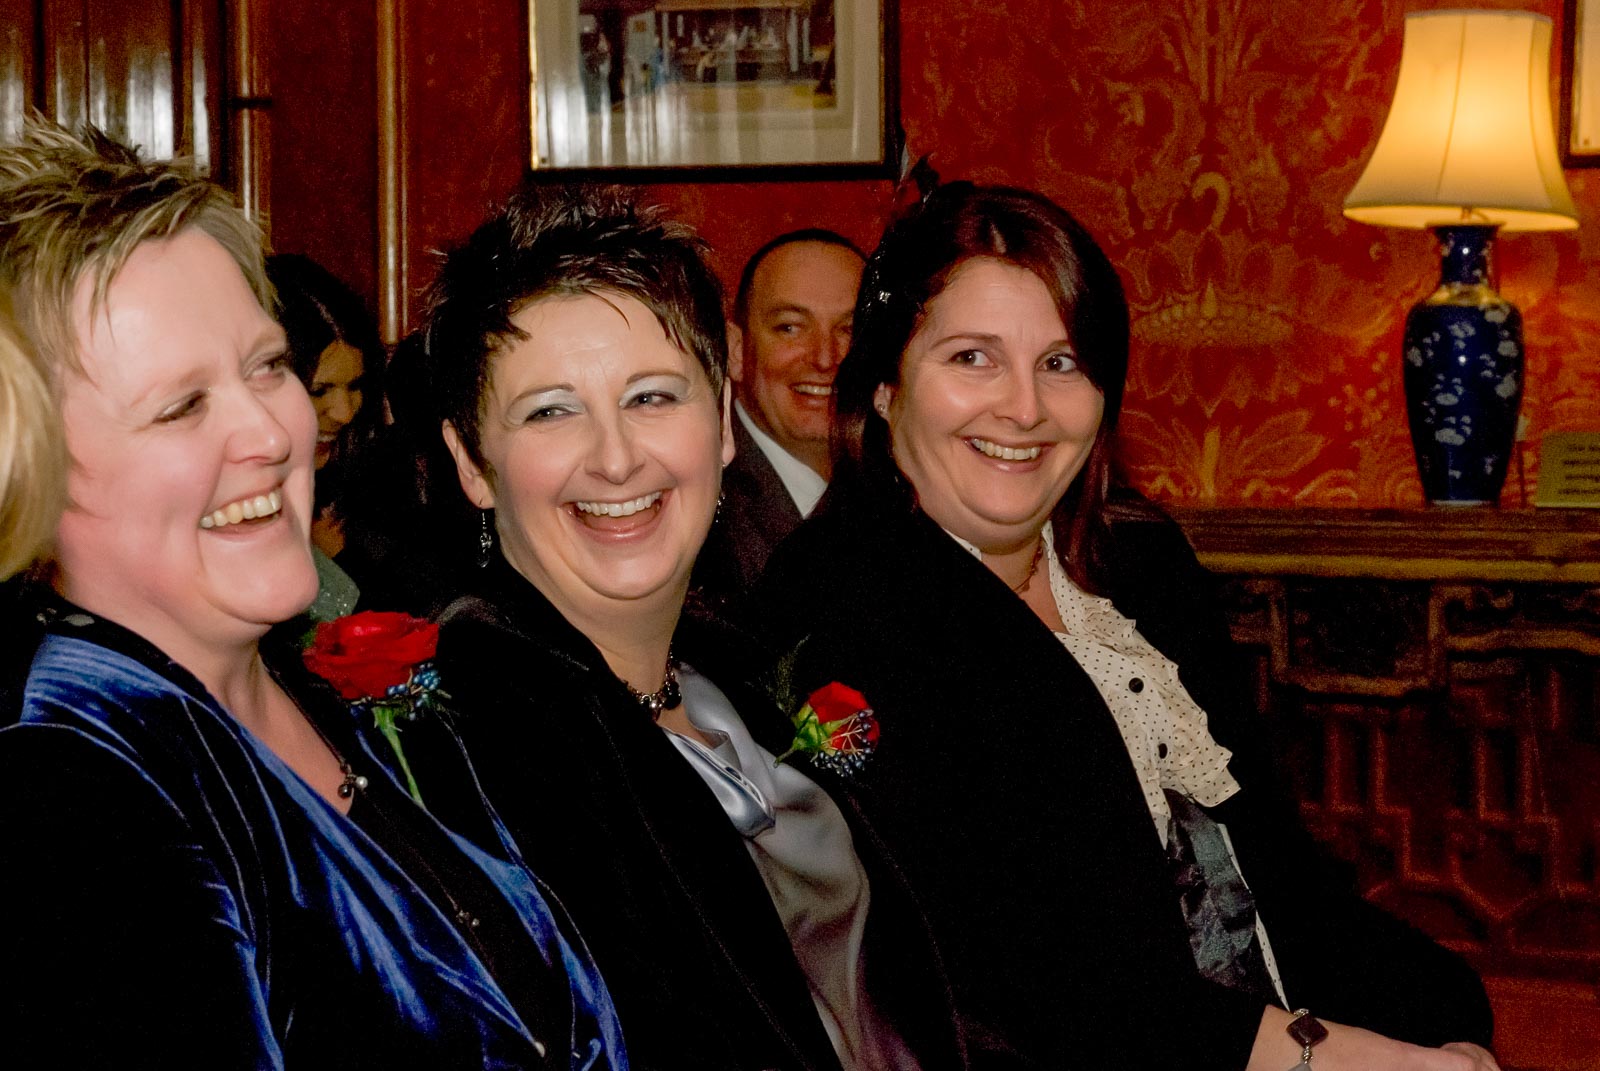 Laura and Paula laugh surrounded by guests inside Brighton Dome before their civil partnership.